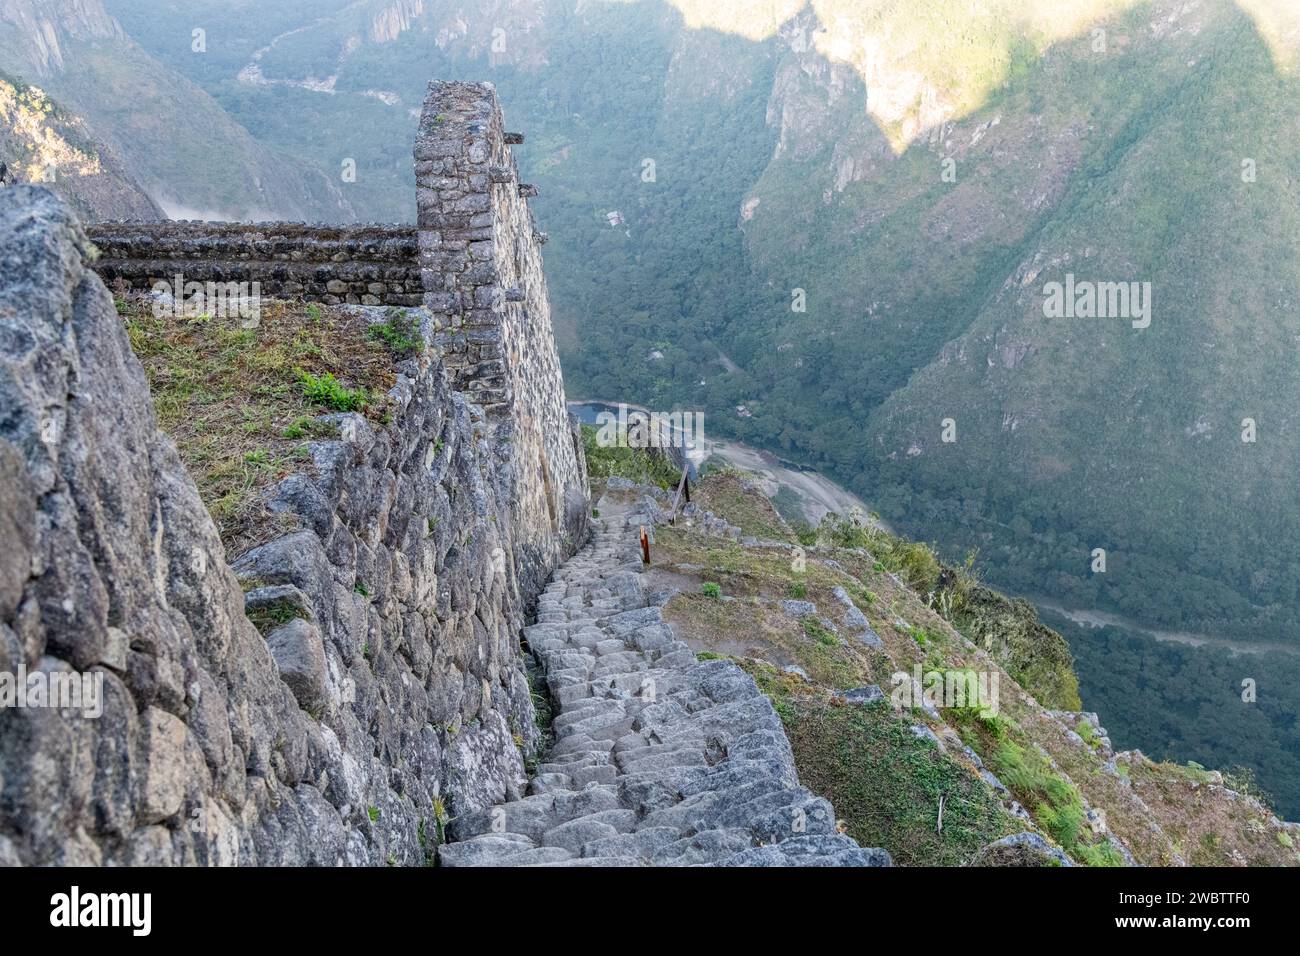 Stone steps on the path / trail leading up to the top of Huayna Picchu mountain at Machu Picchu in Peru Stock Photo